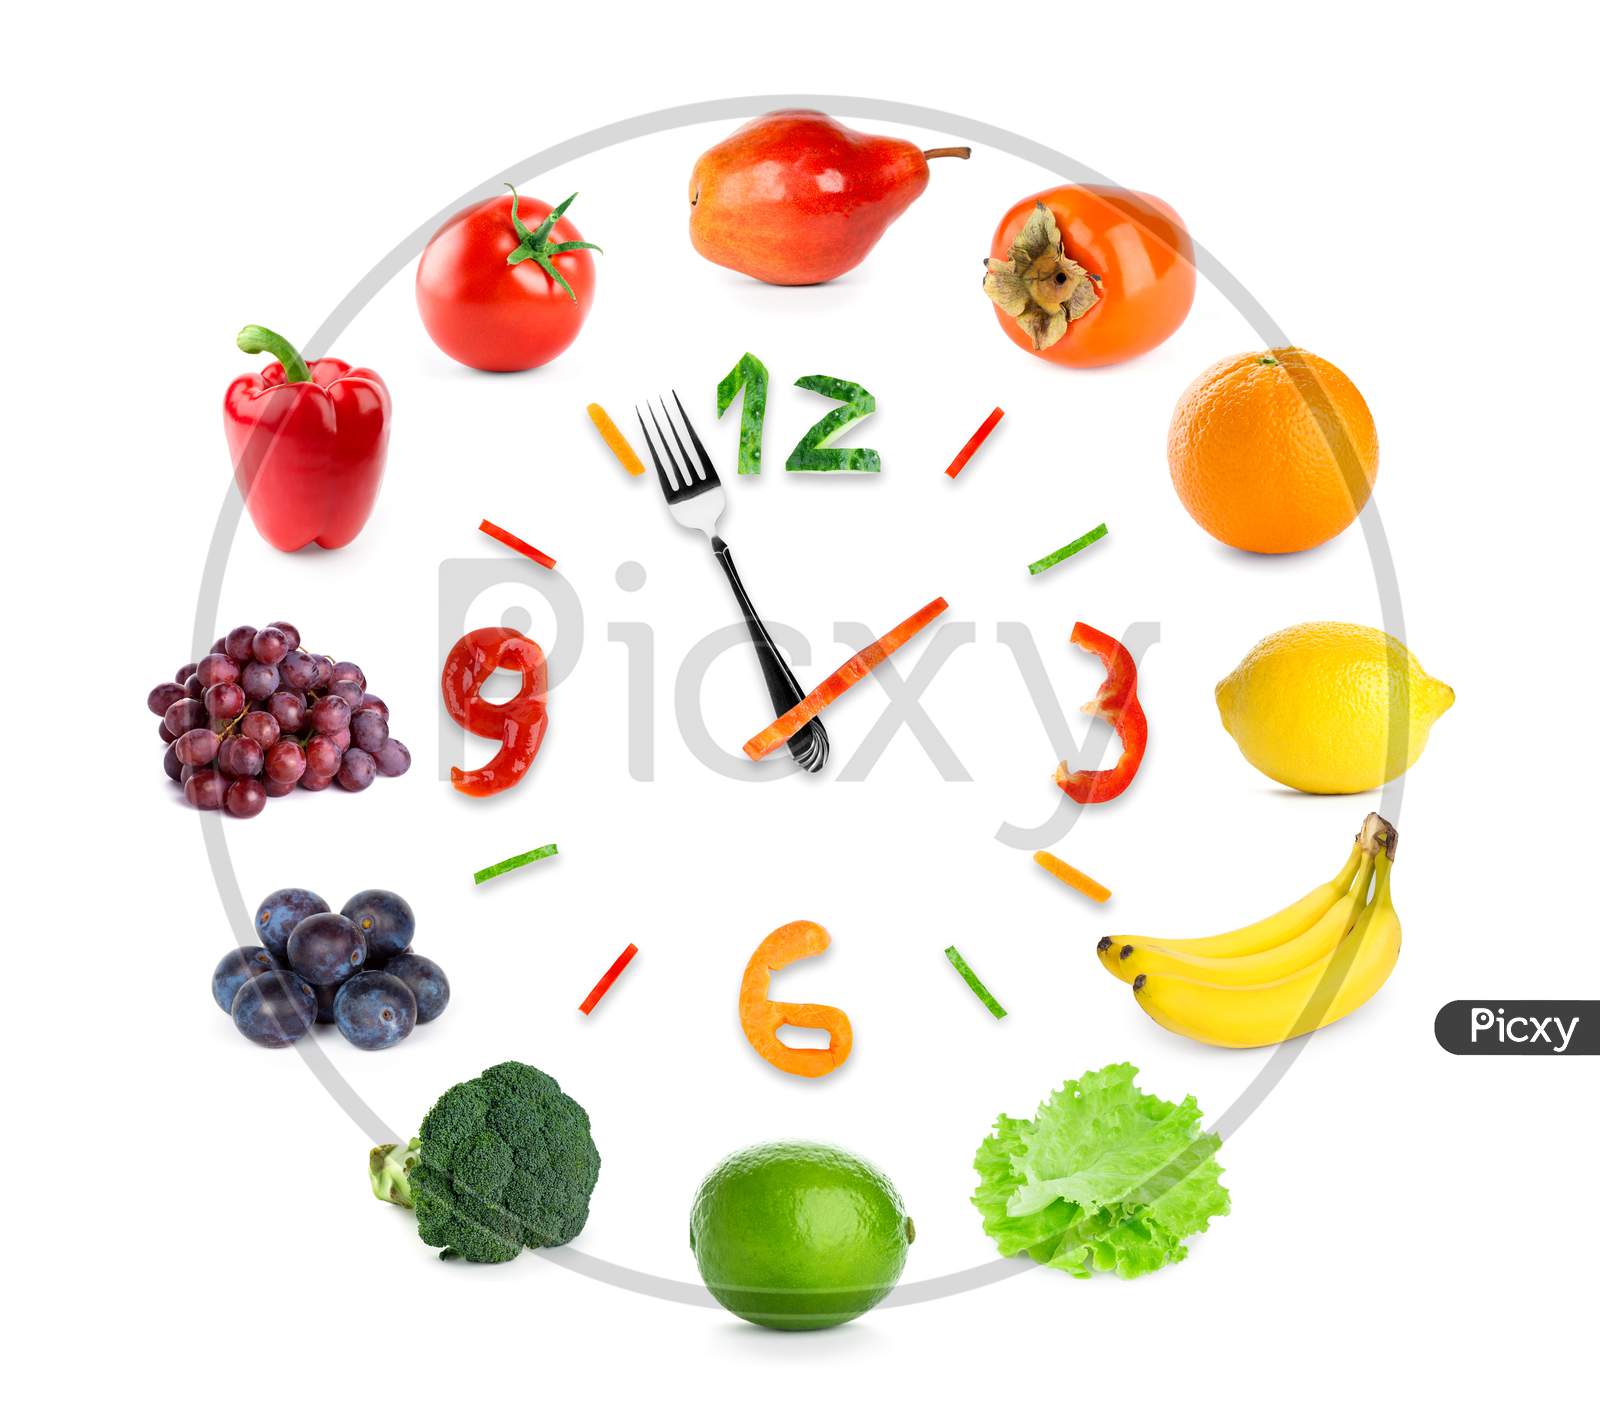 Food Clock on a white background